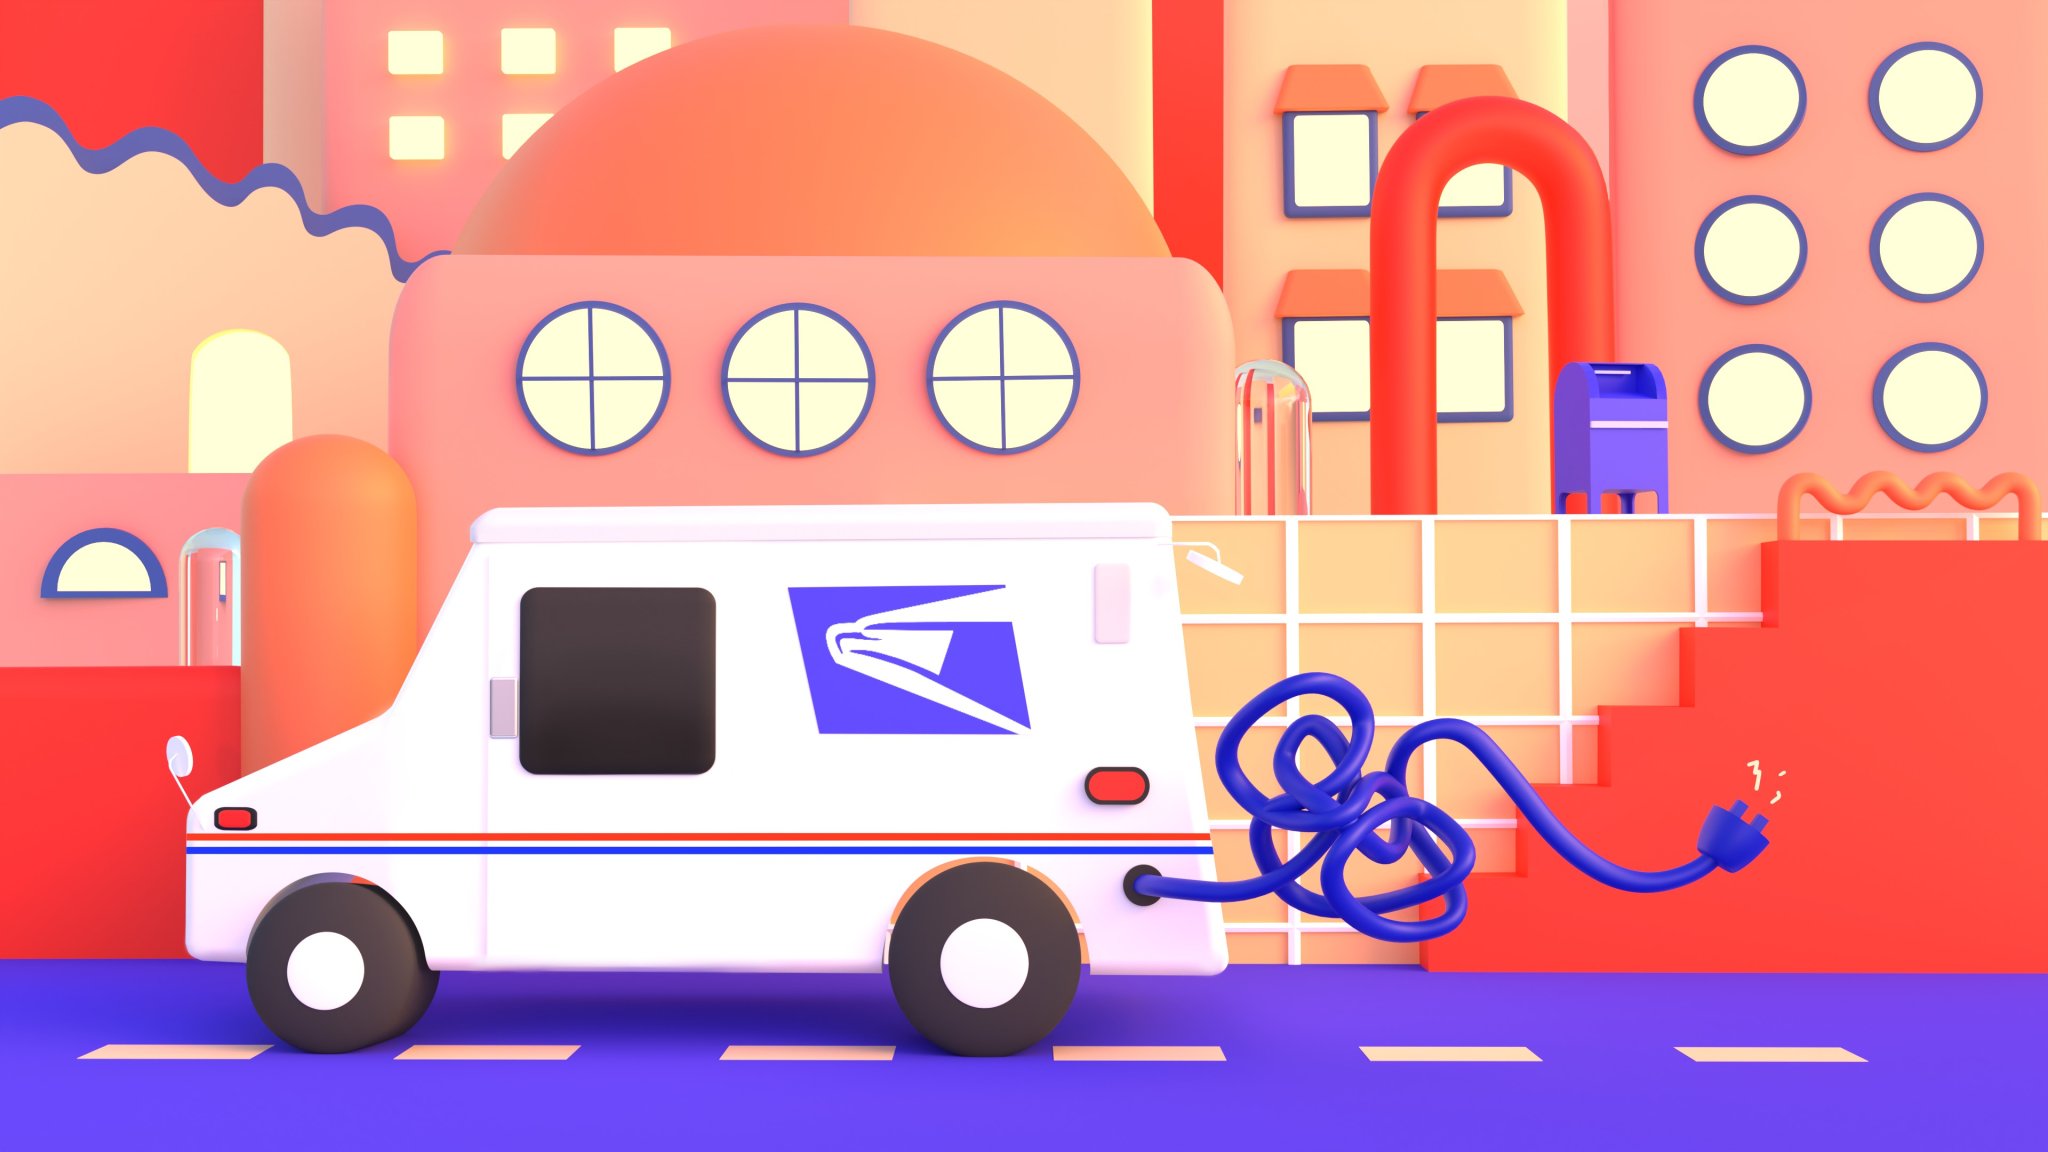 Who Killed the Electric Mail Truck?